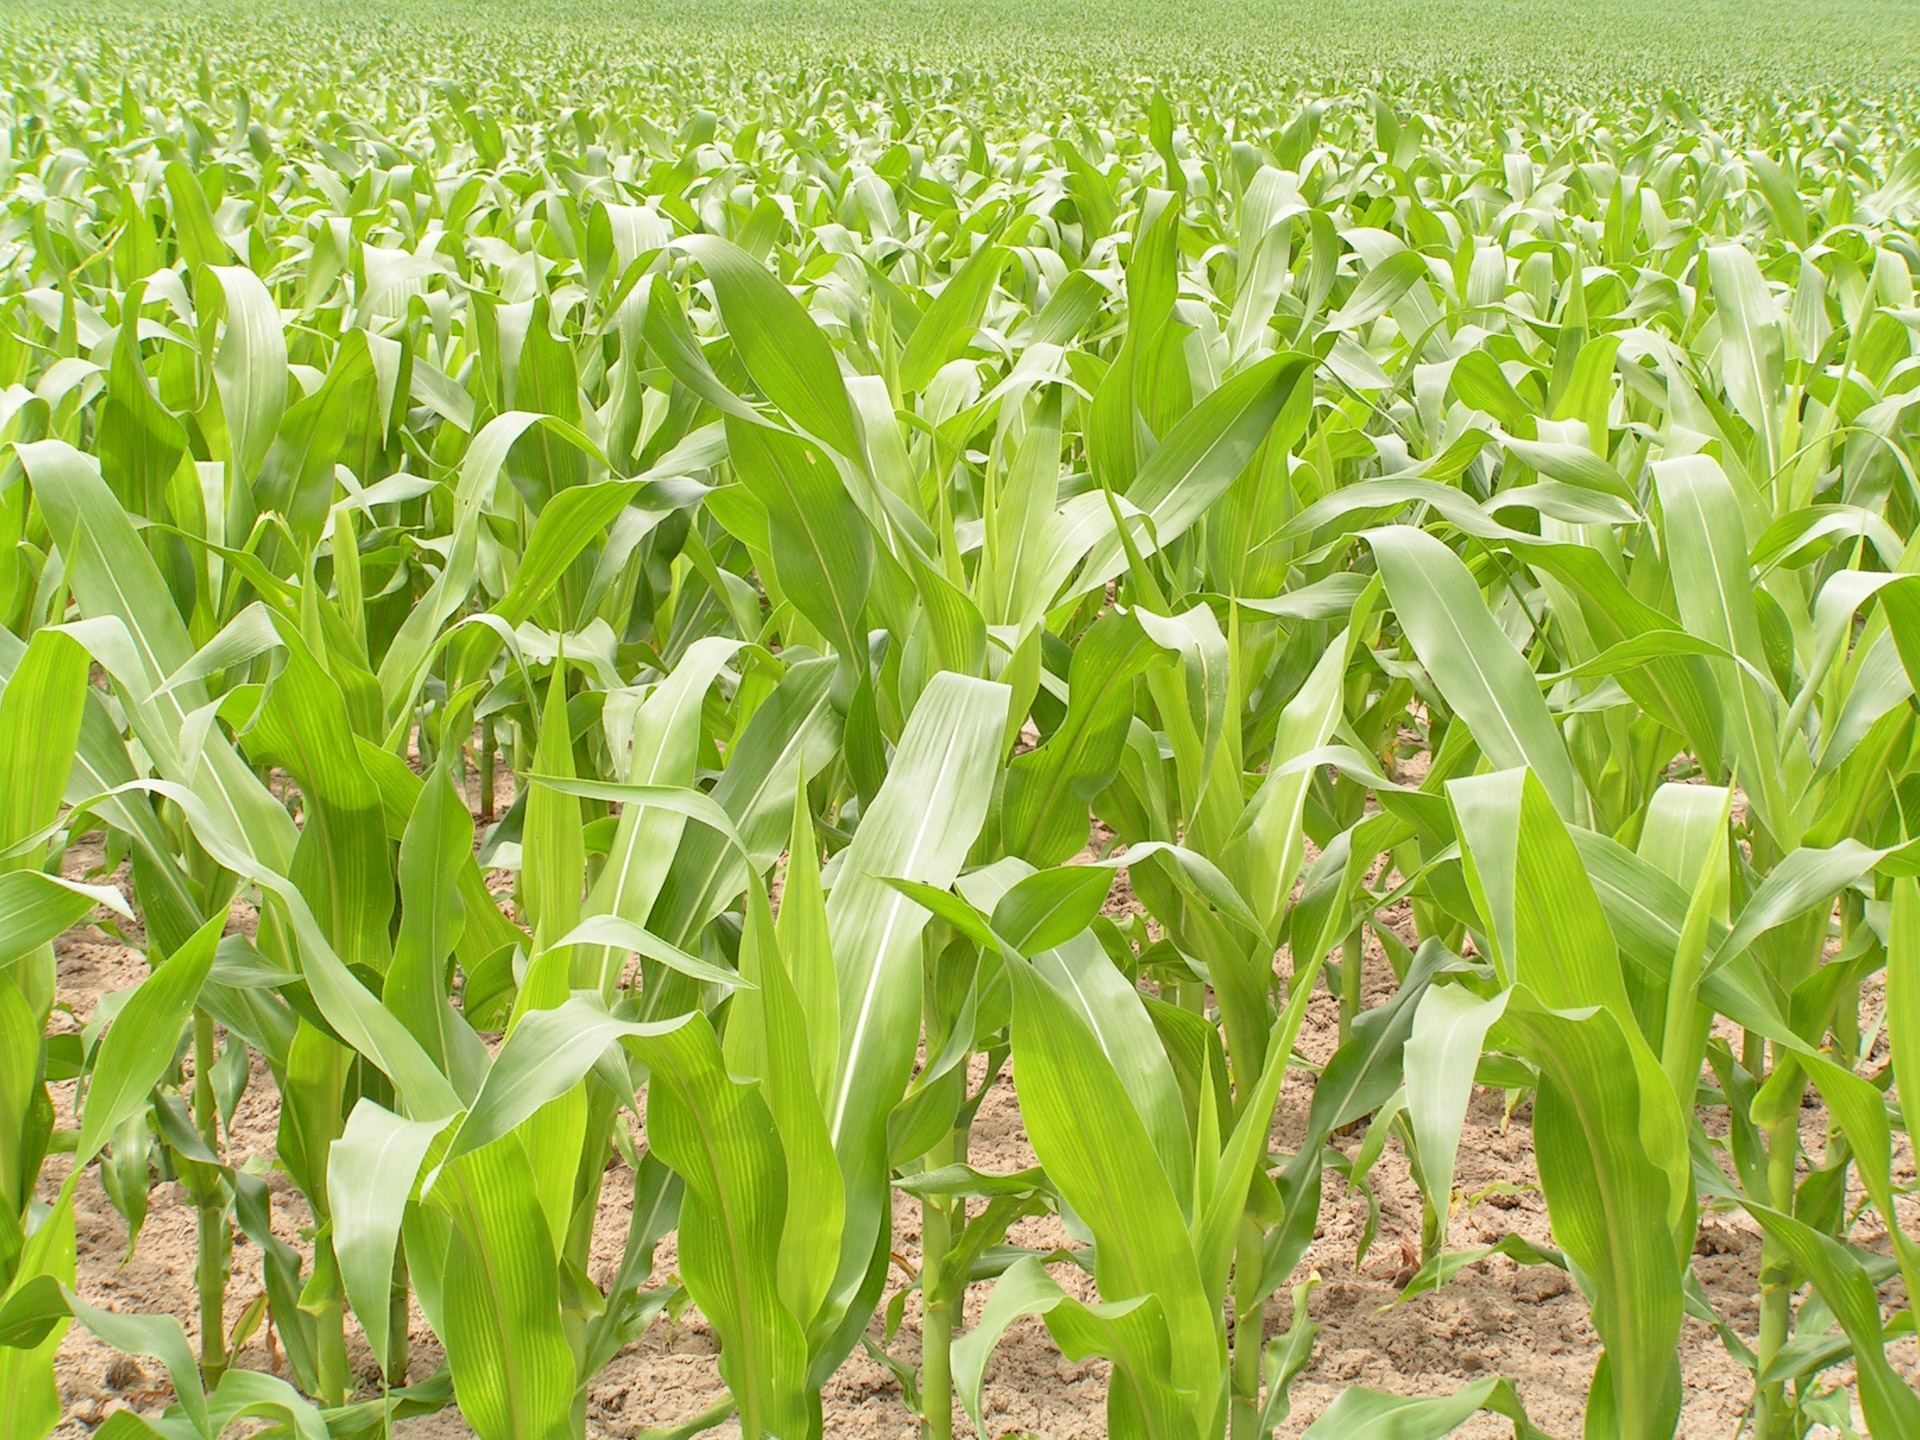 Field of brightly colored green growing corn.